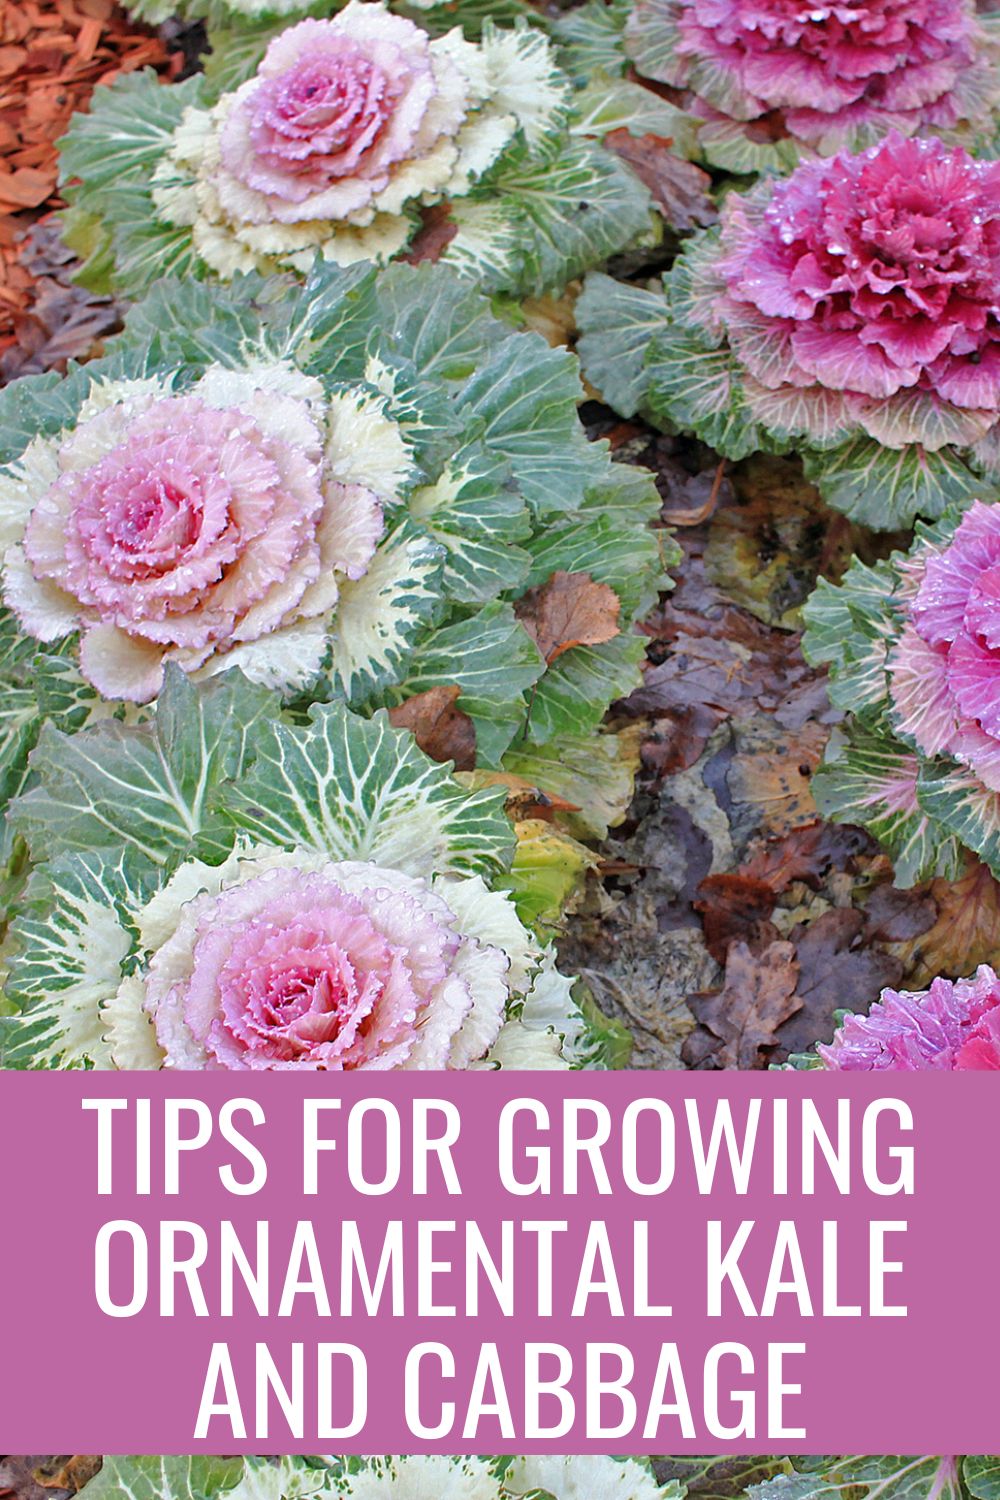 Tips for growing ornamental kale and cabbage.